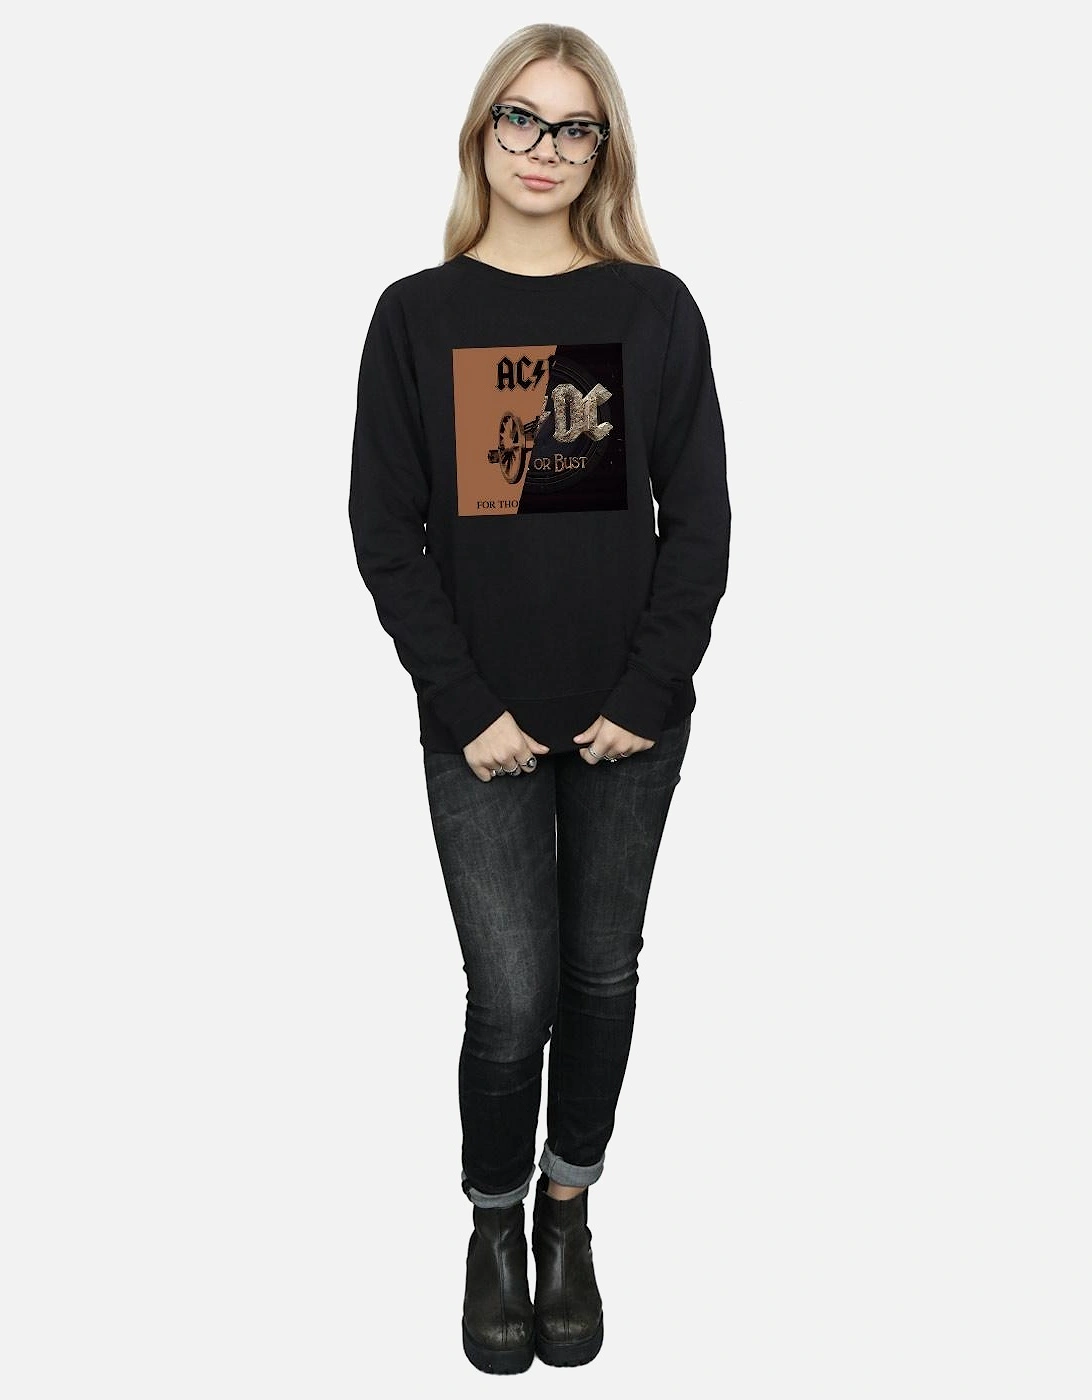 Womens/Ladies Rock or Bust / For Those About Splice Sweatshirt